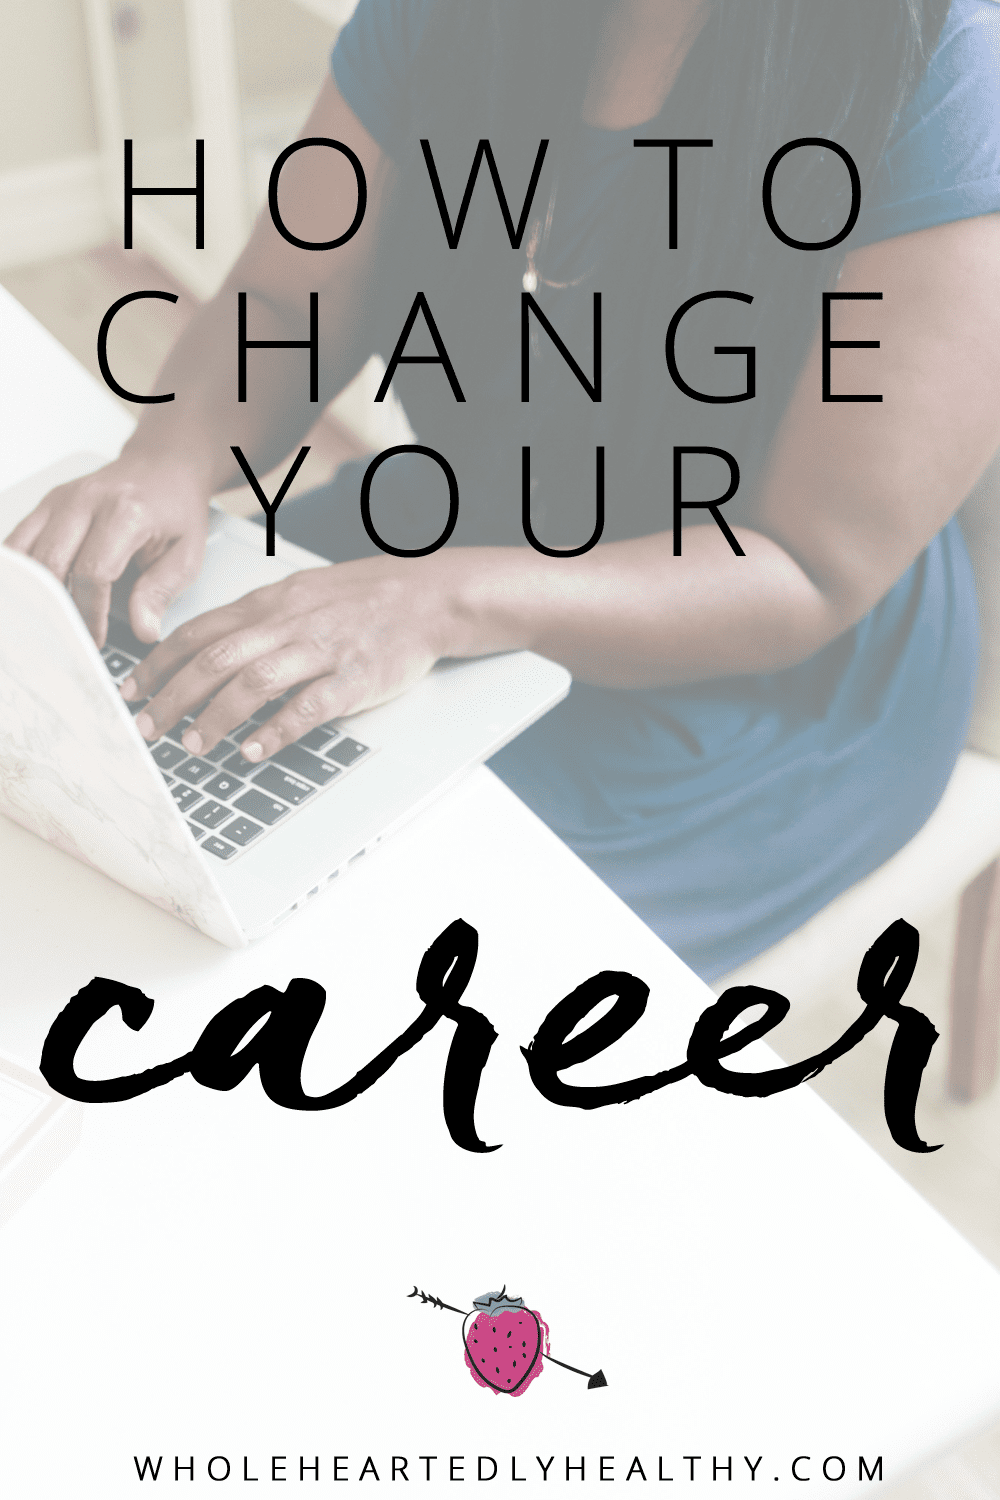 How to change your career